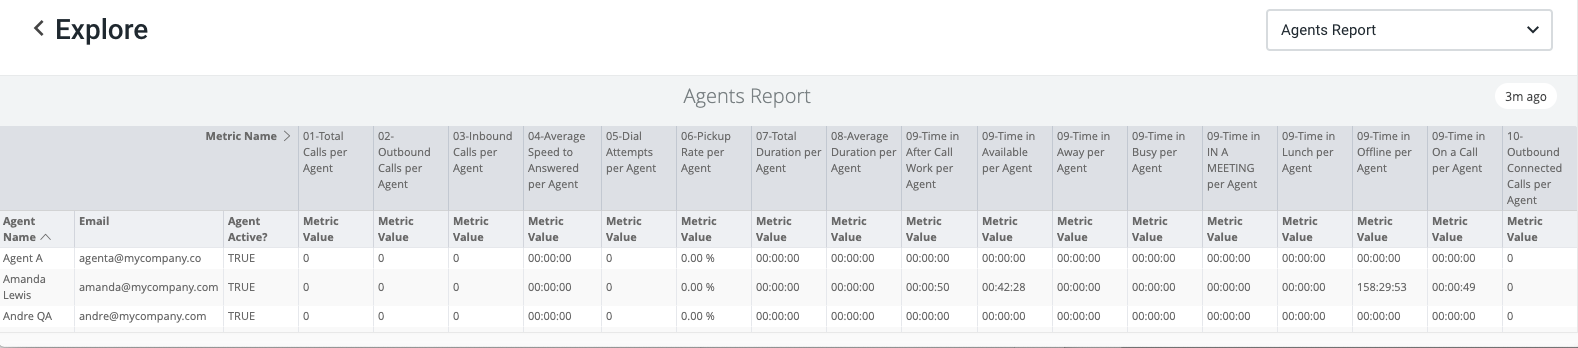 Agents_Report_example_for_Explore_overview.png